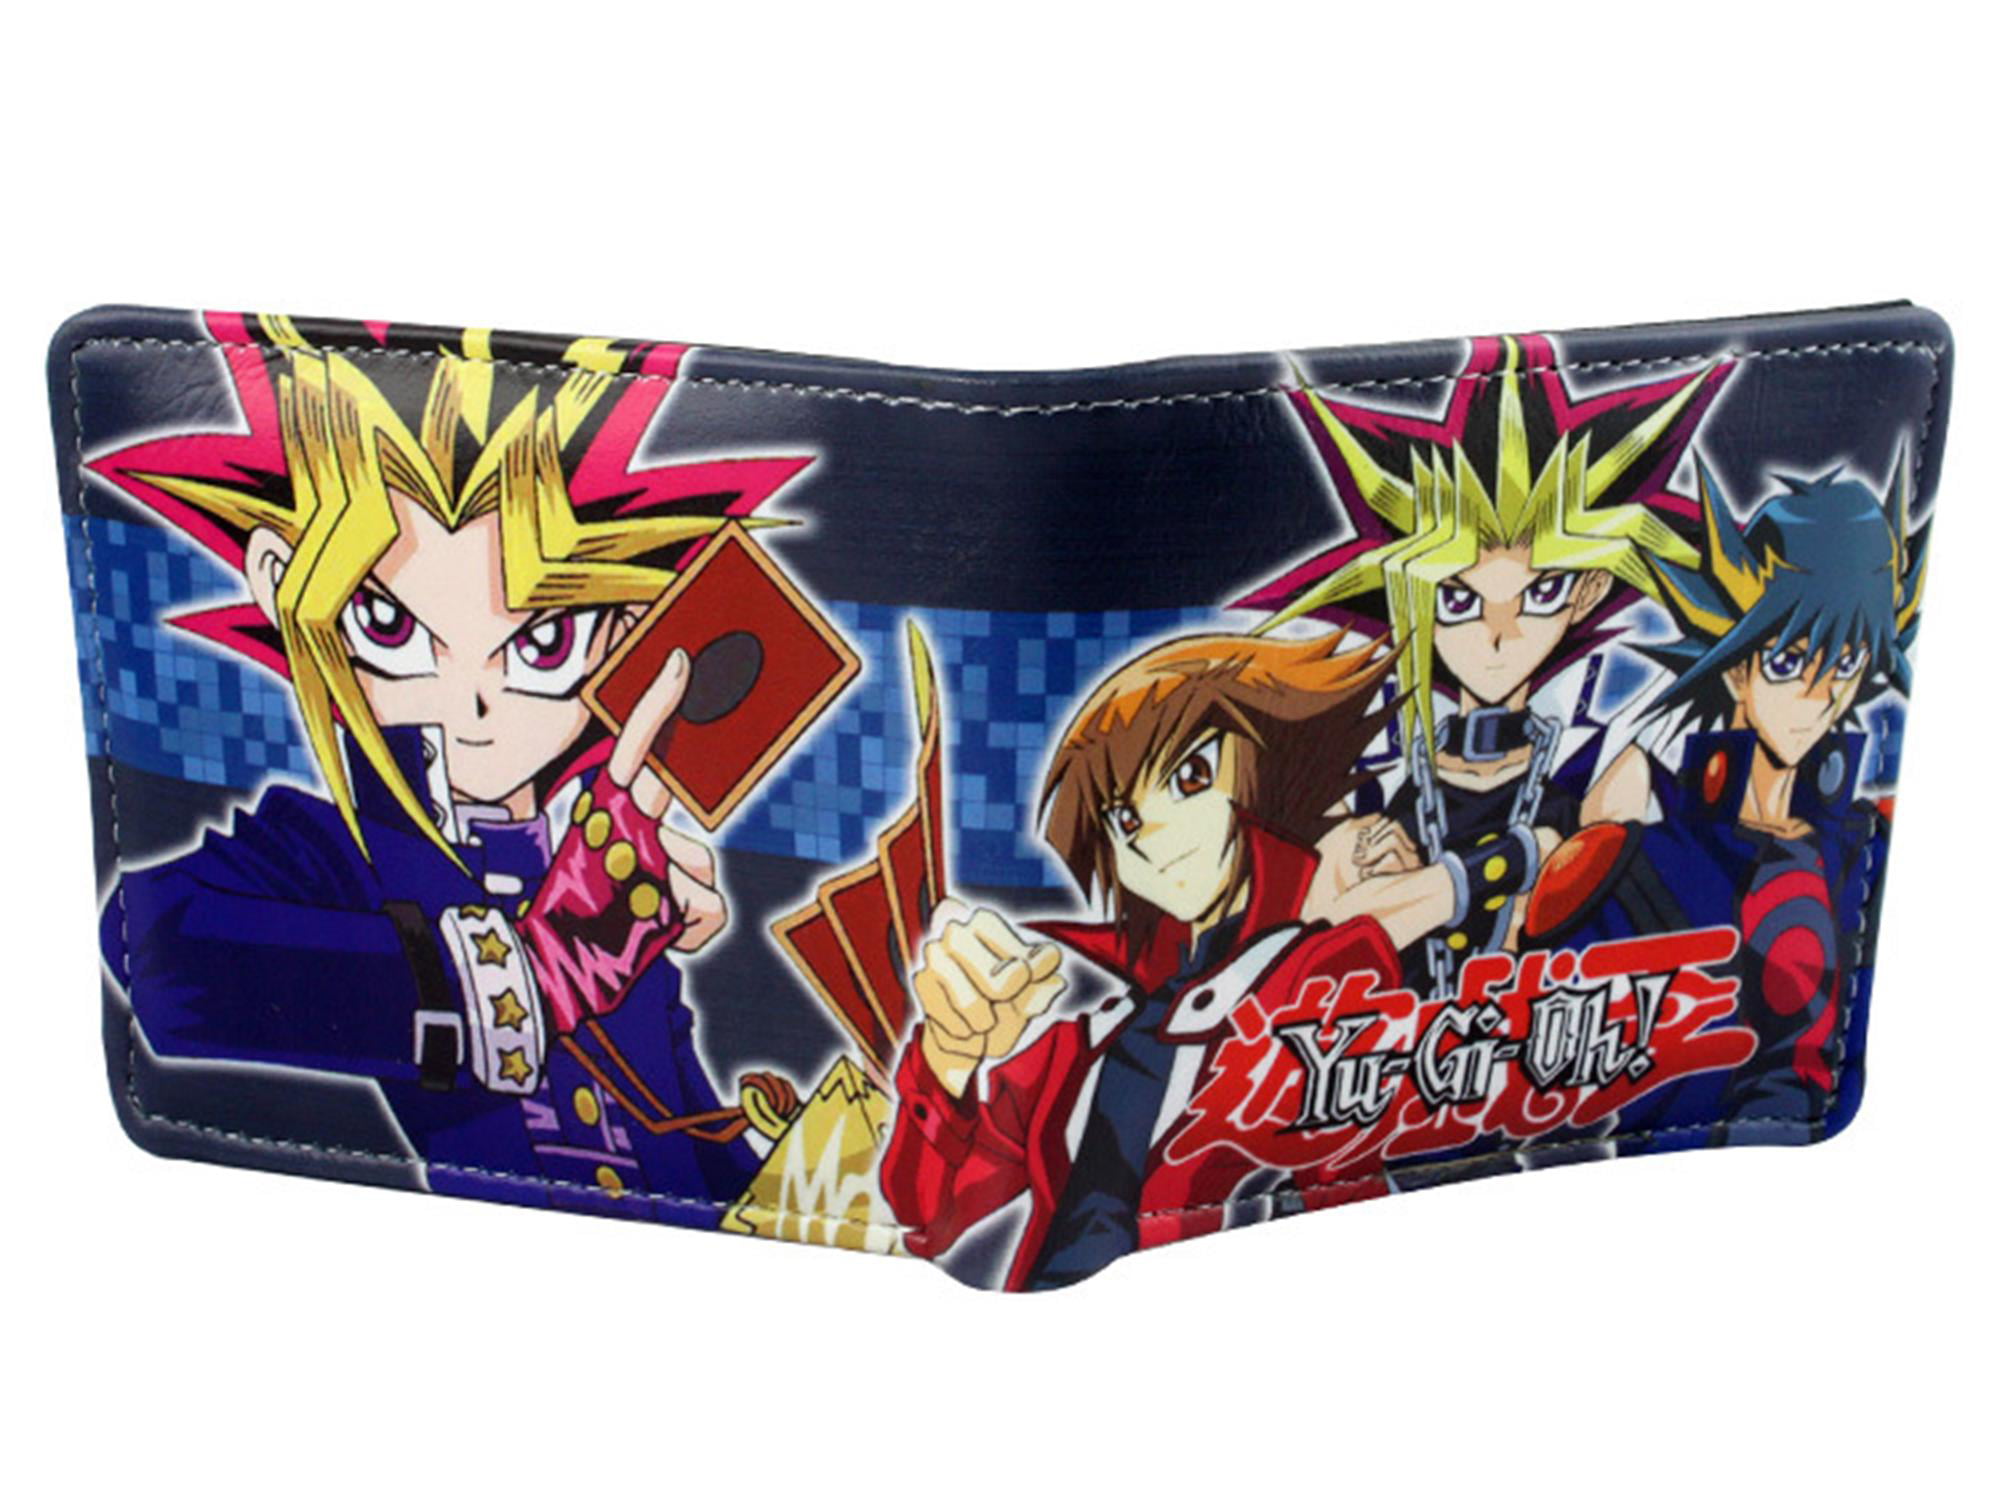 Anime Yu-Gi-Oh Characters Mens Boys Wallet w/Gift box By Superheroes -  